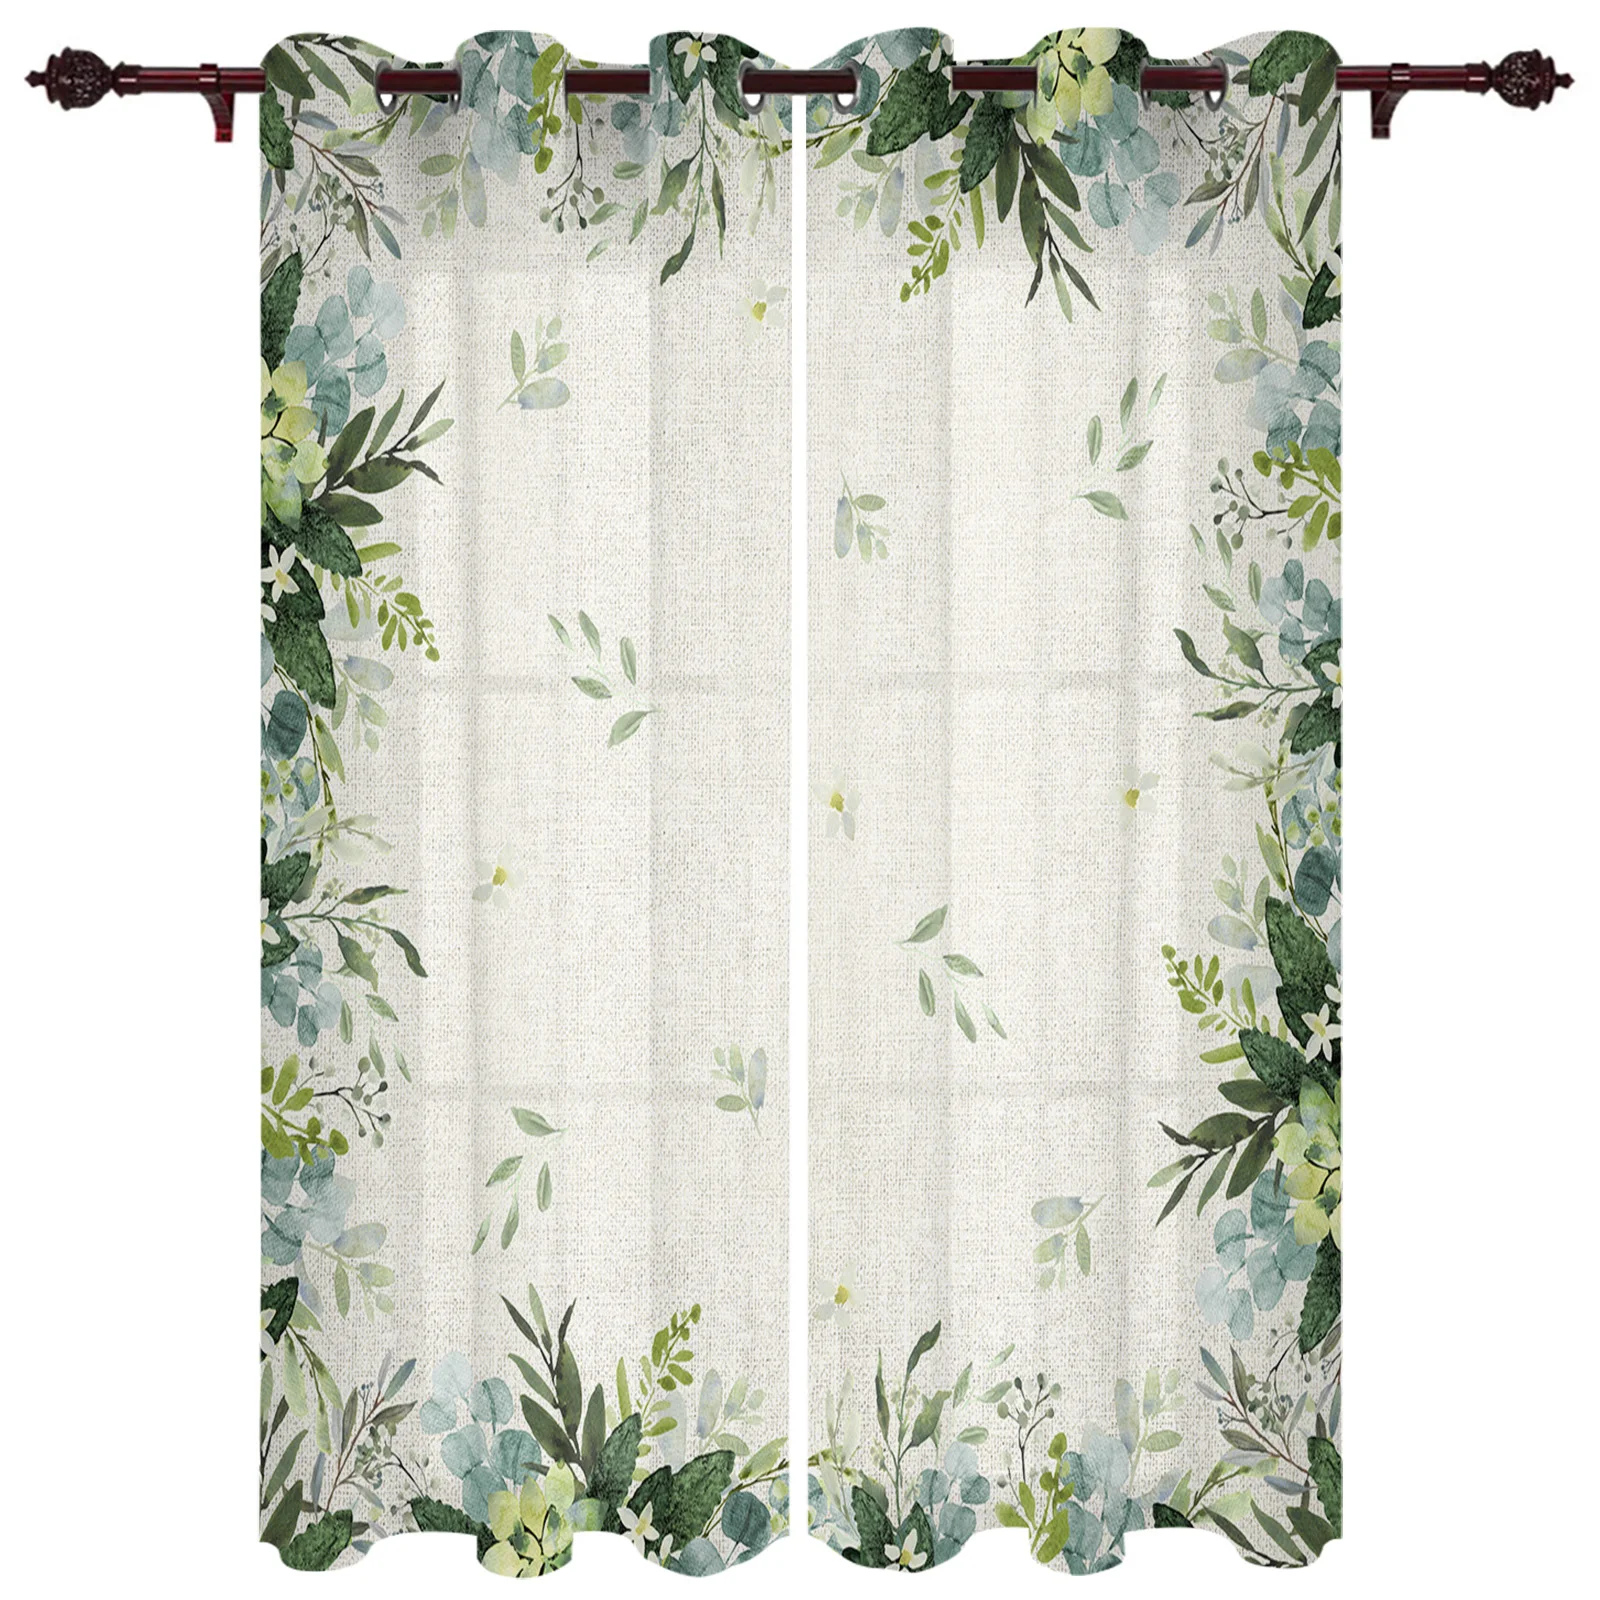 

Watercolor Eucalyptus Leaves Farm Vintage Modern Window Curtains for Living Room Bedroom Curtain Kitchen Treatment Blinds Drapes